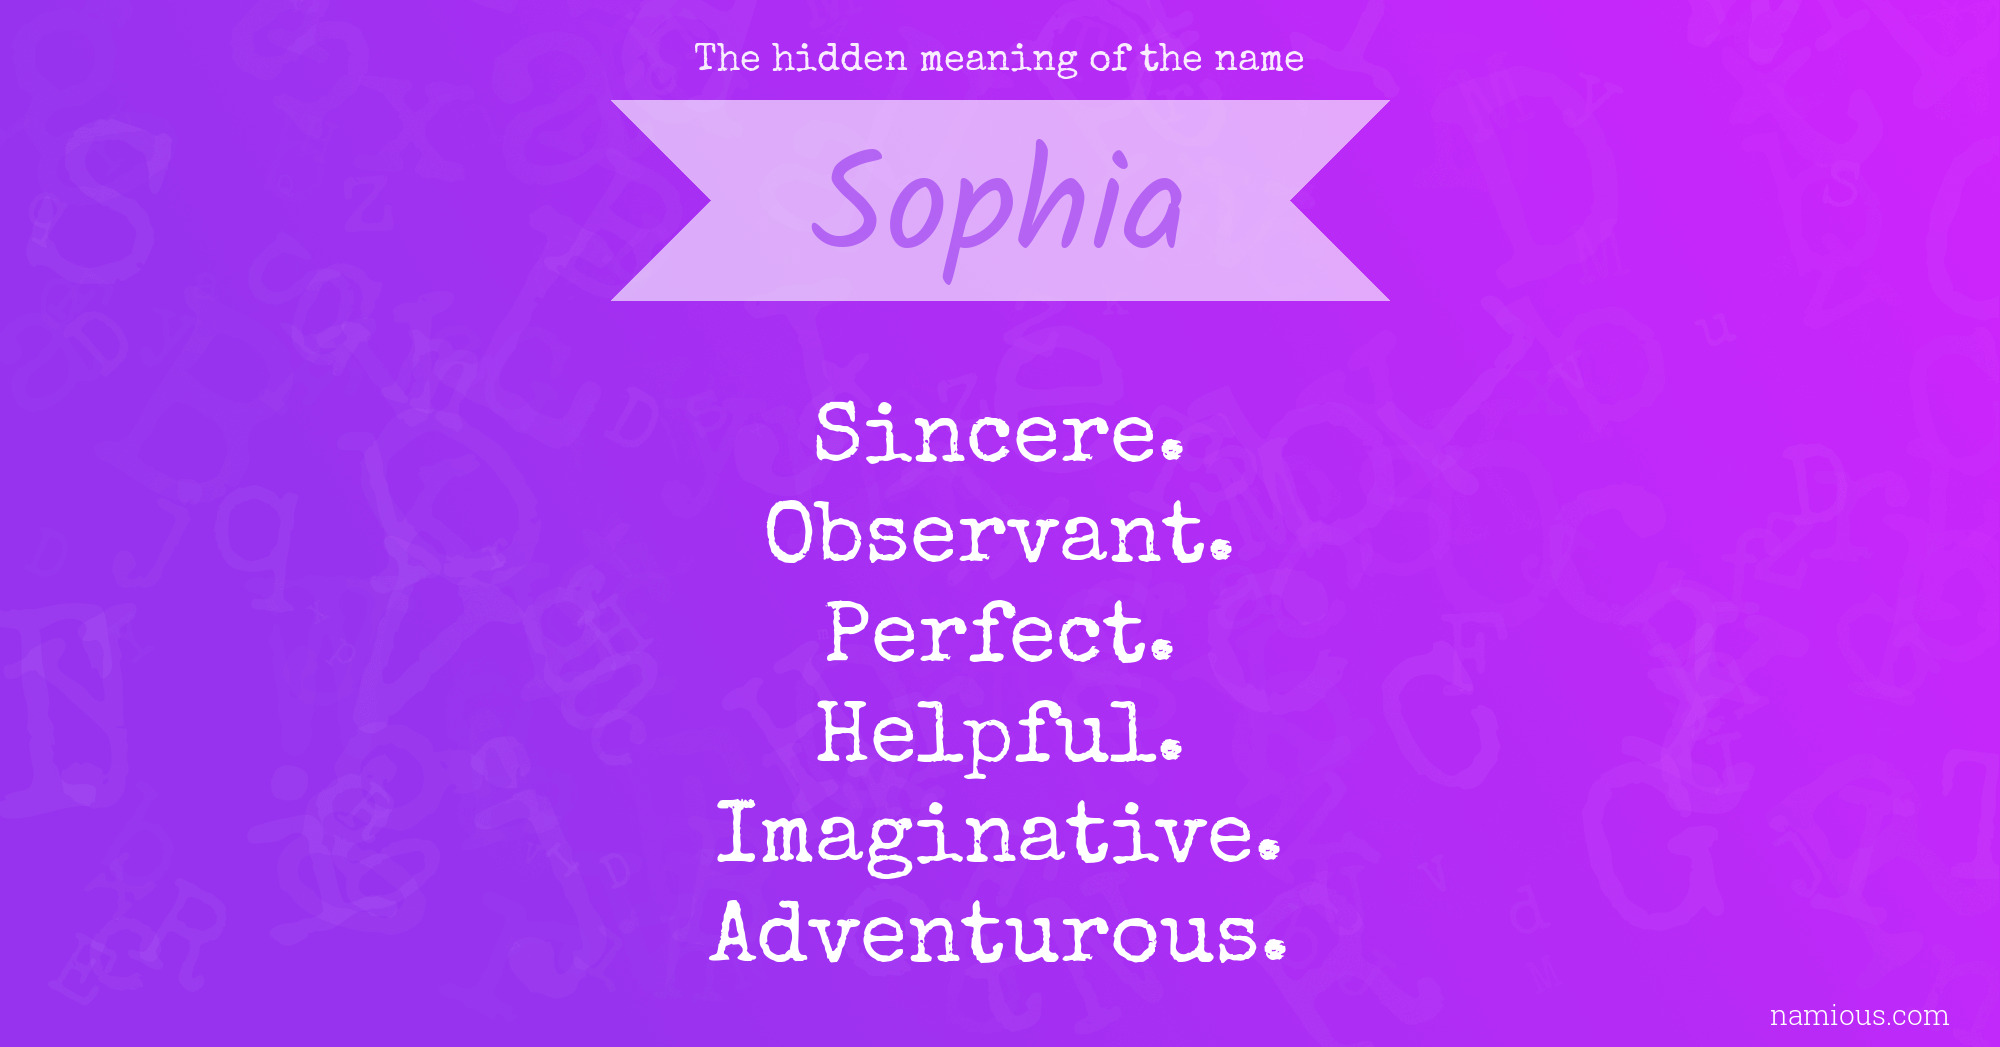 The hidden meaning of the name Sophia